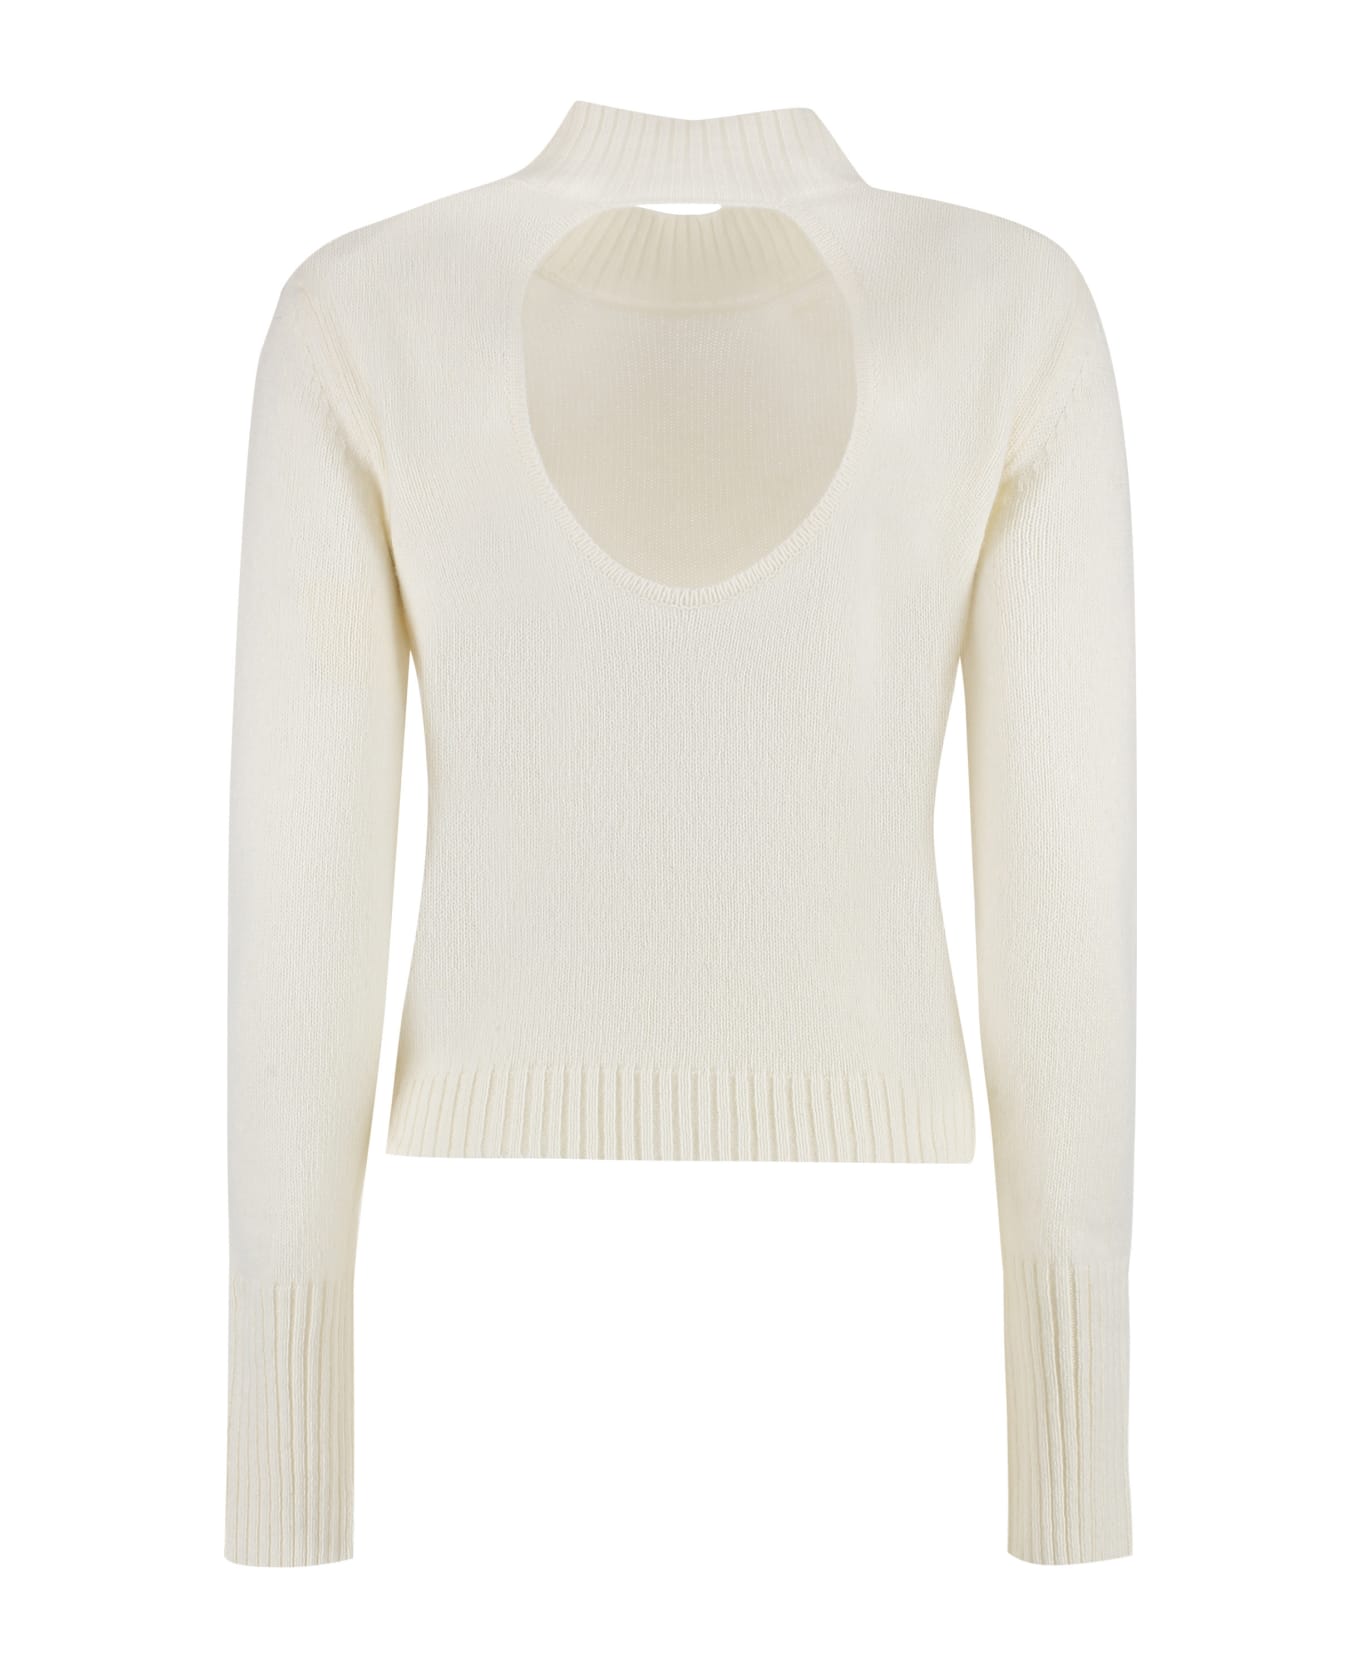 Federica Tosi Wool And Cashmere Sweater - panna ニットウェア